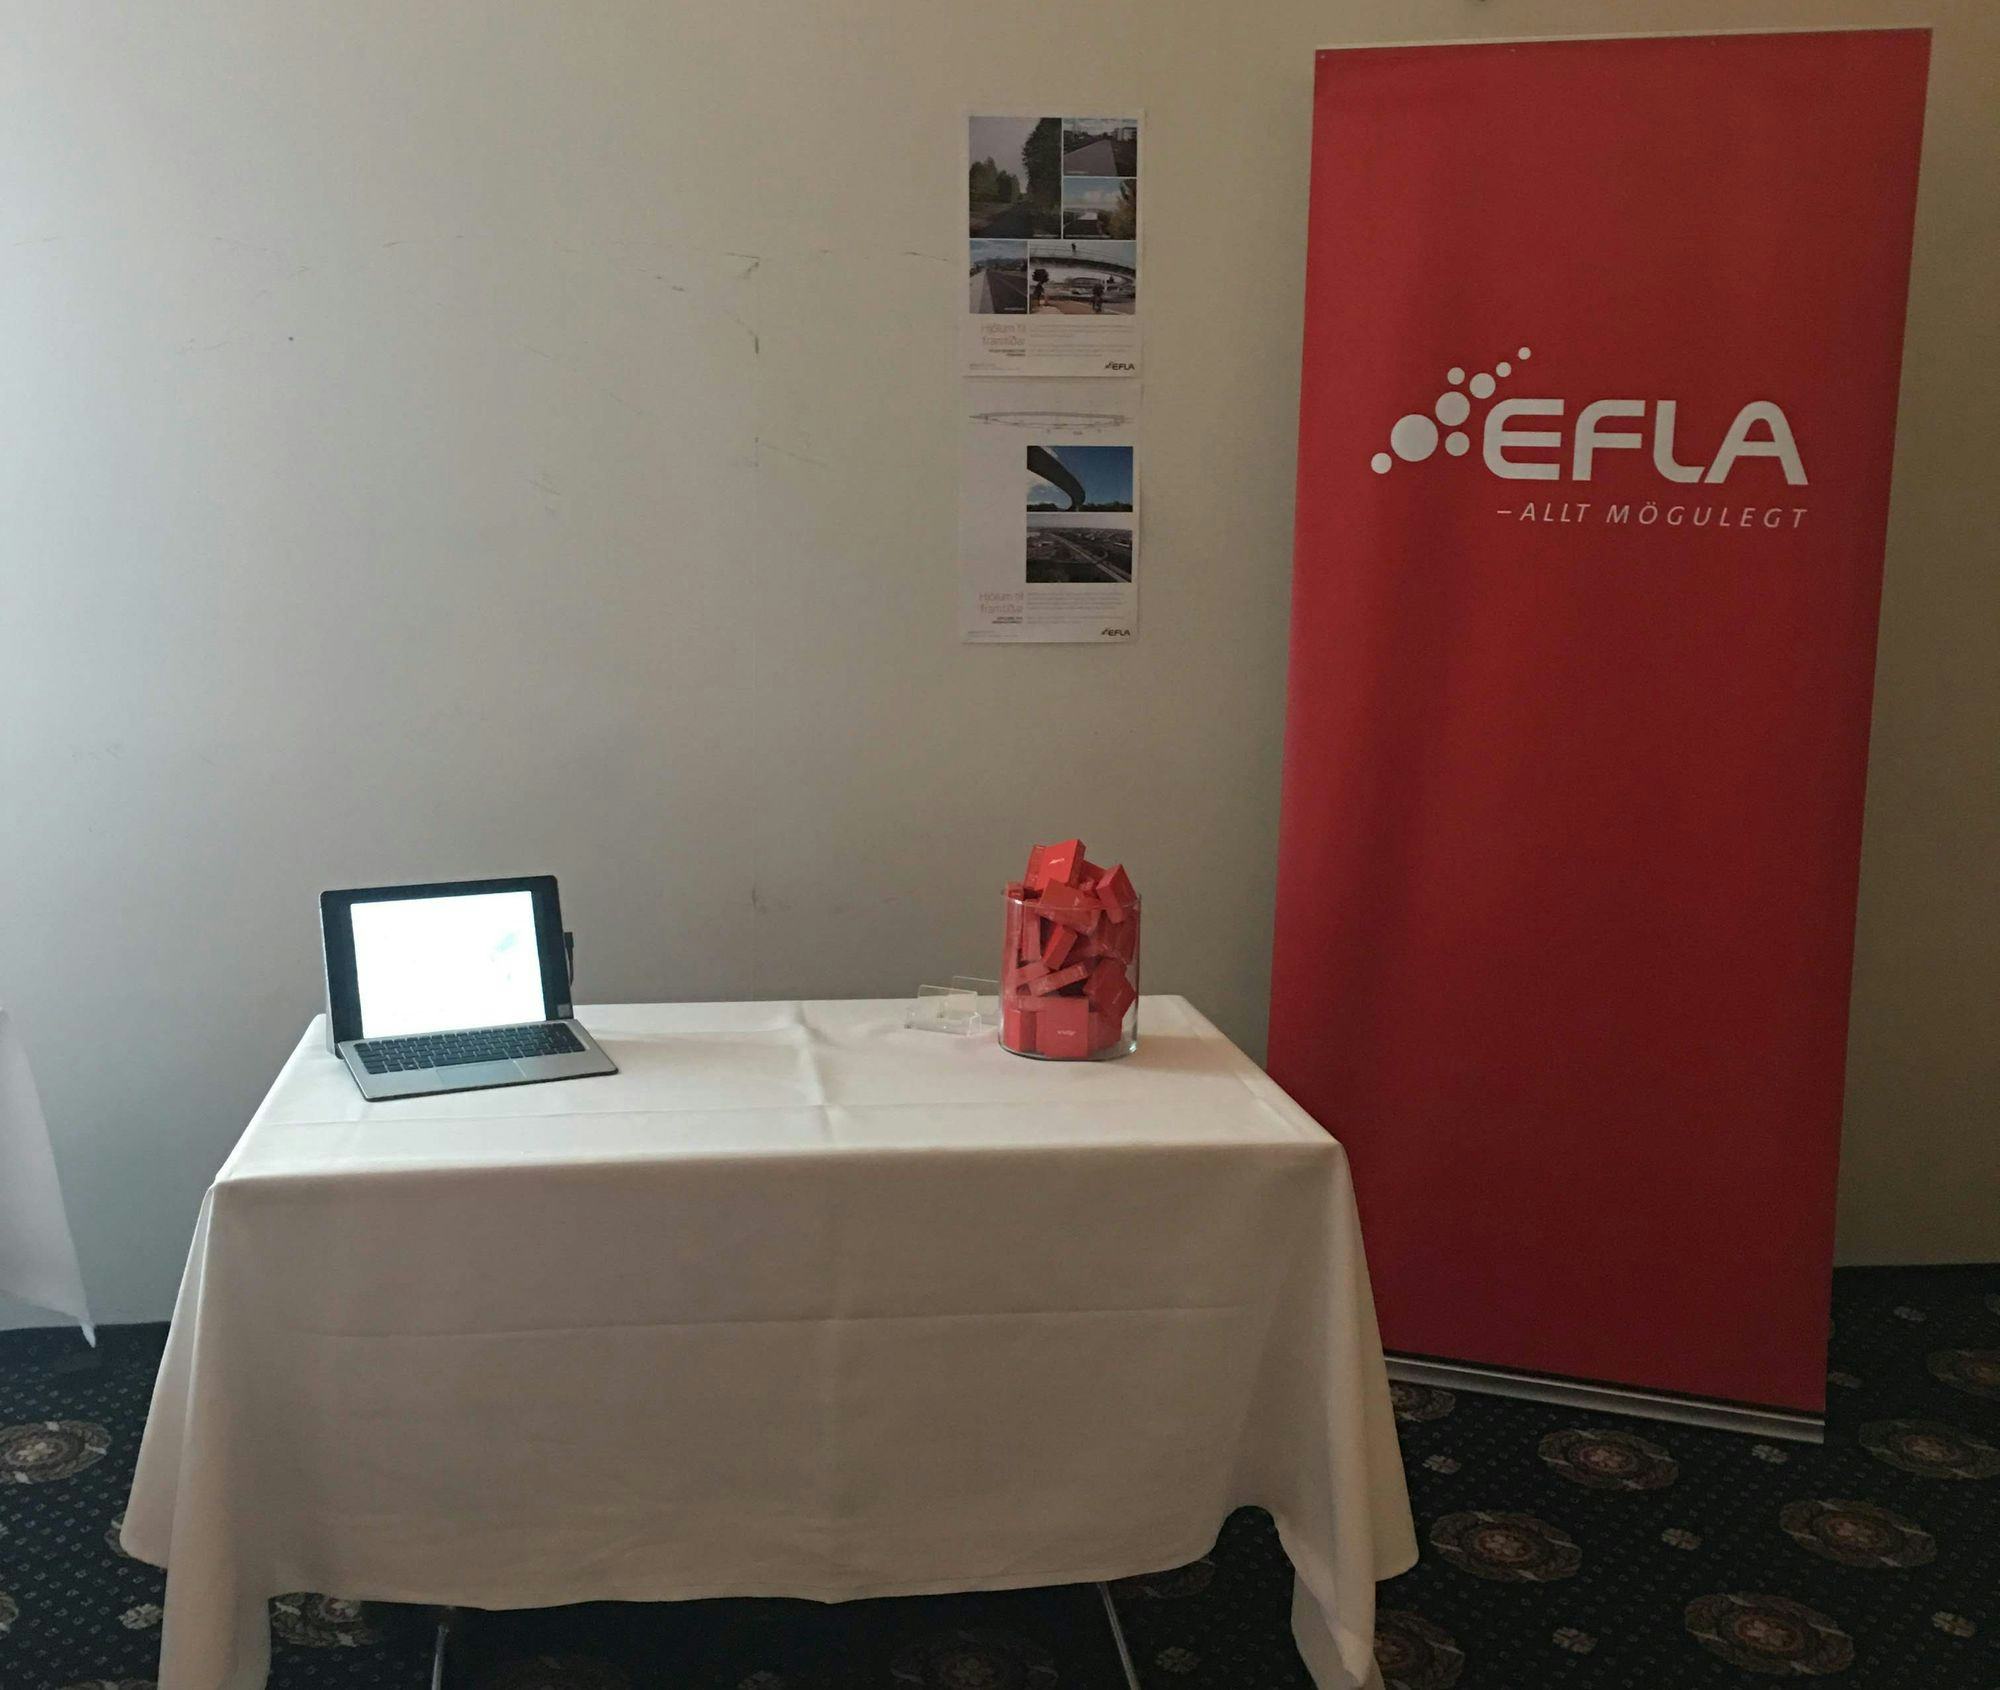 Image shows registration or information table with a laptop and red packages in a glass container